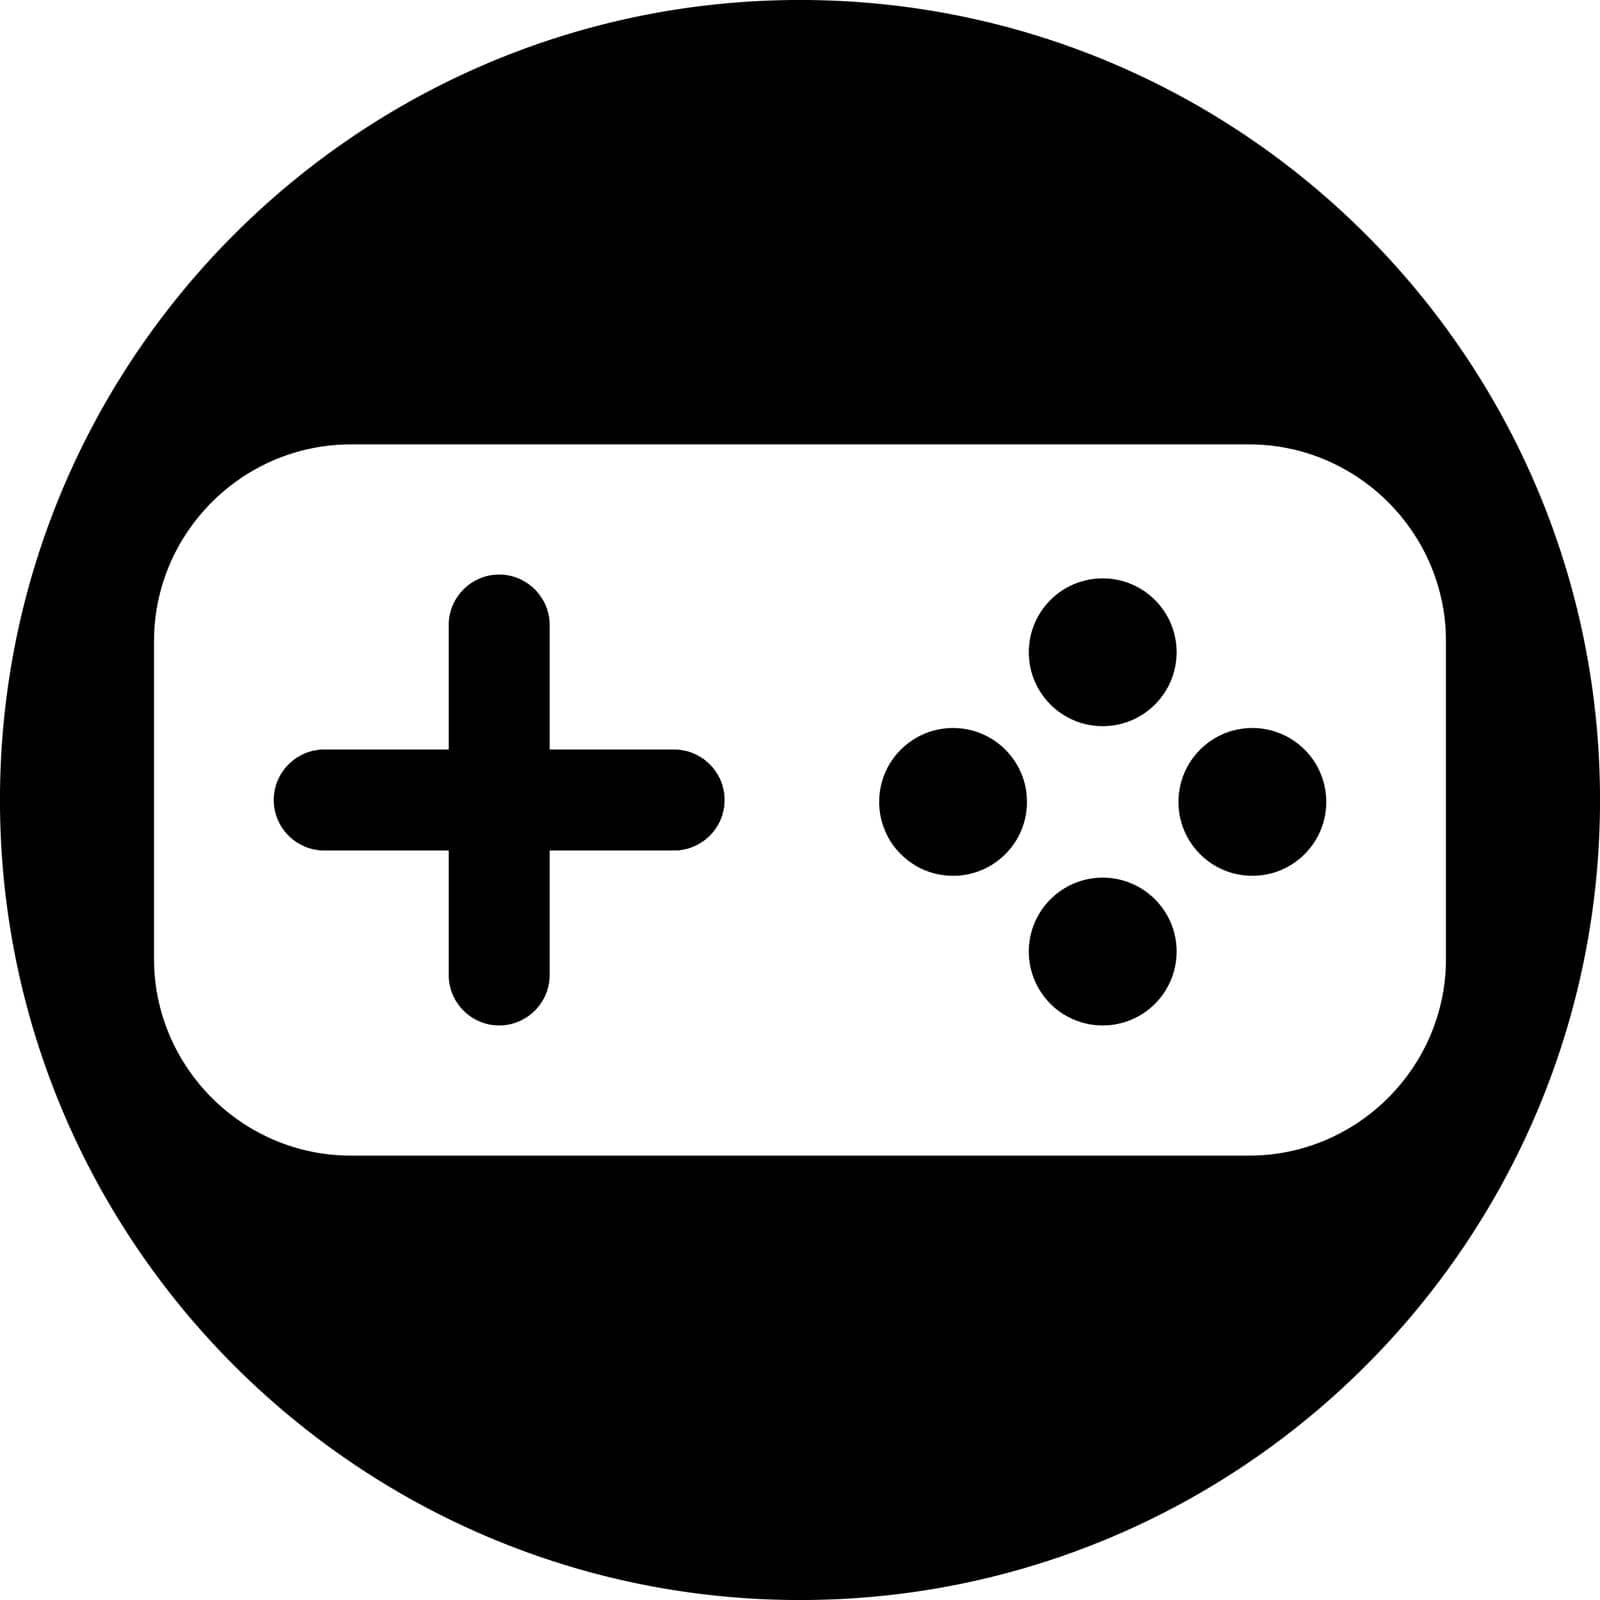 Gamepad, vector. Gamepad black color logo on a white background.